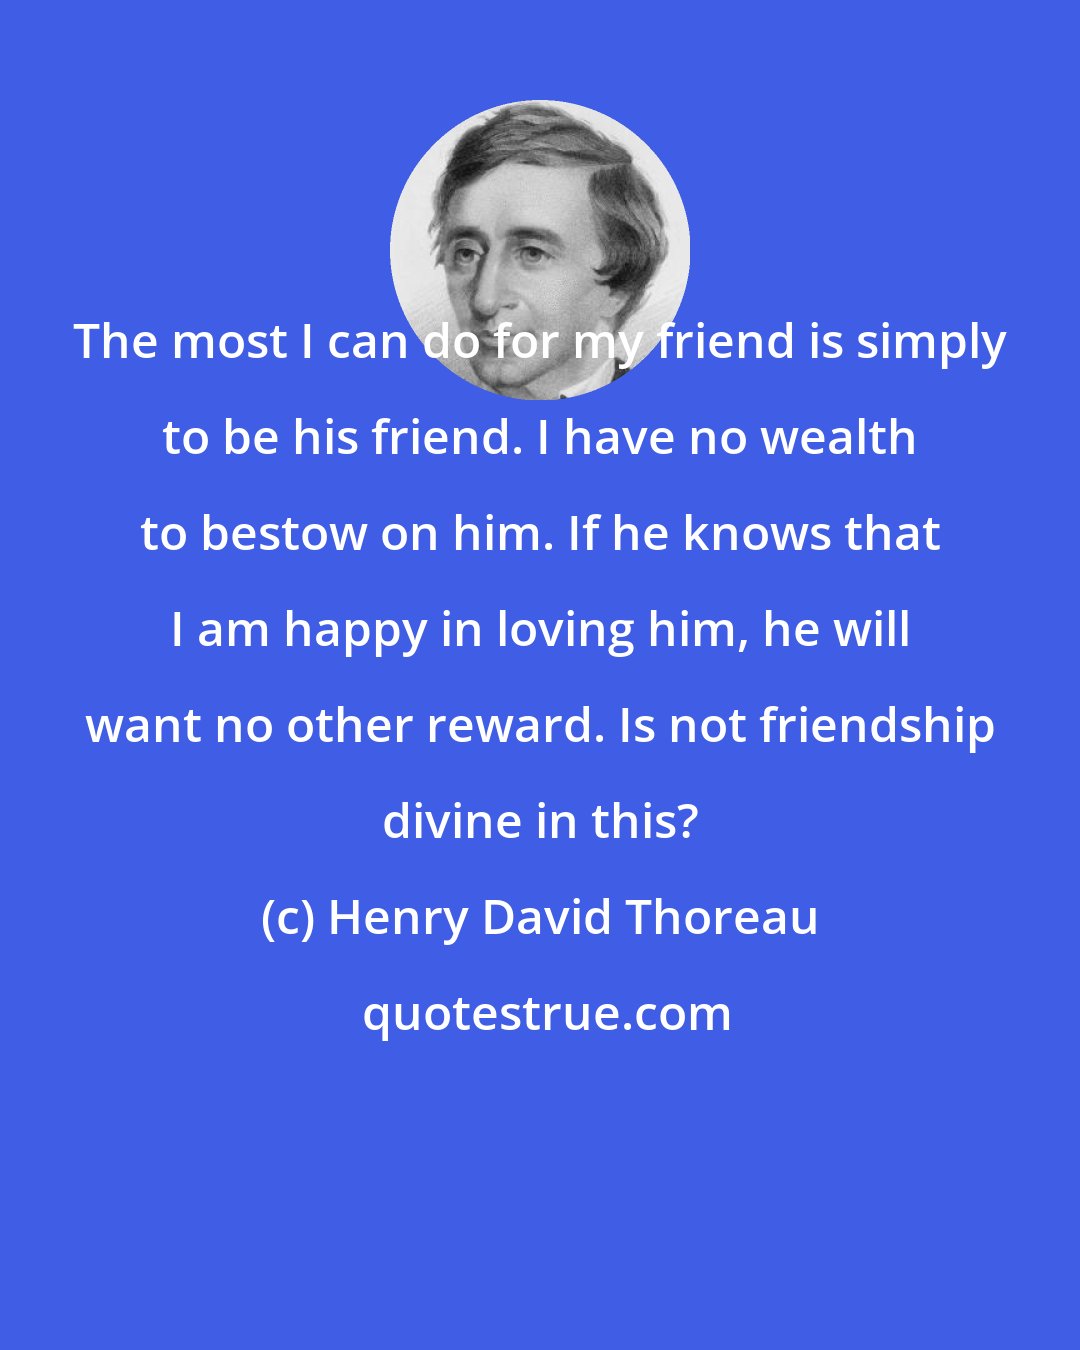 Henry David Thoreau: The most I can do for my friend is simply to be his friend. I have no wealth to bestow on him. If he knows that I am happy in loving him, he will want no other reward. Is not friendship divine in this?